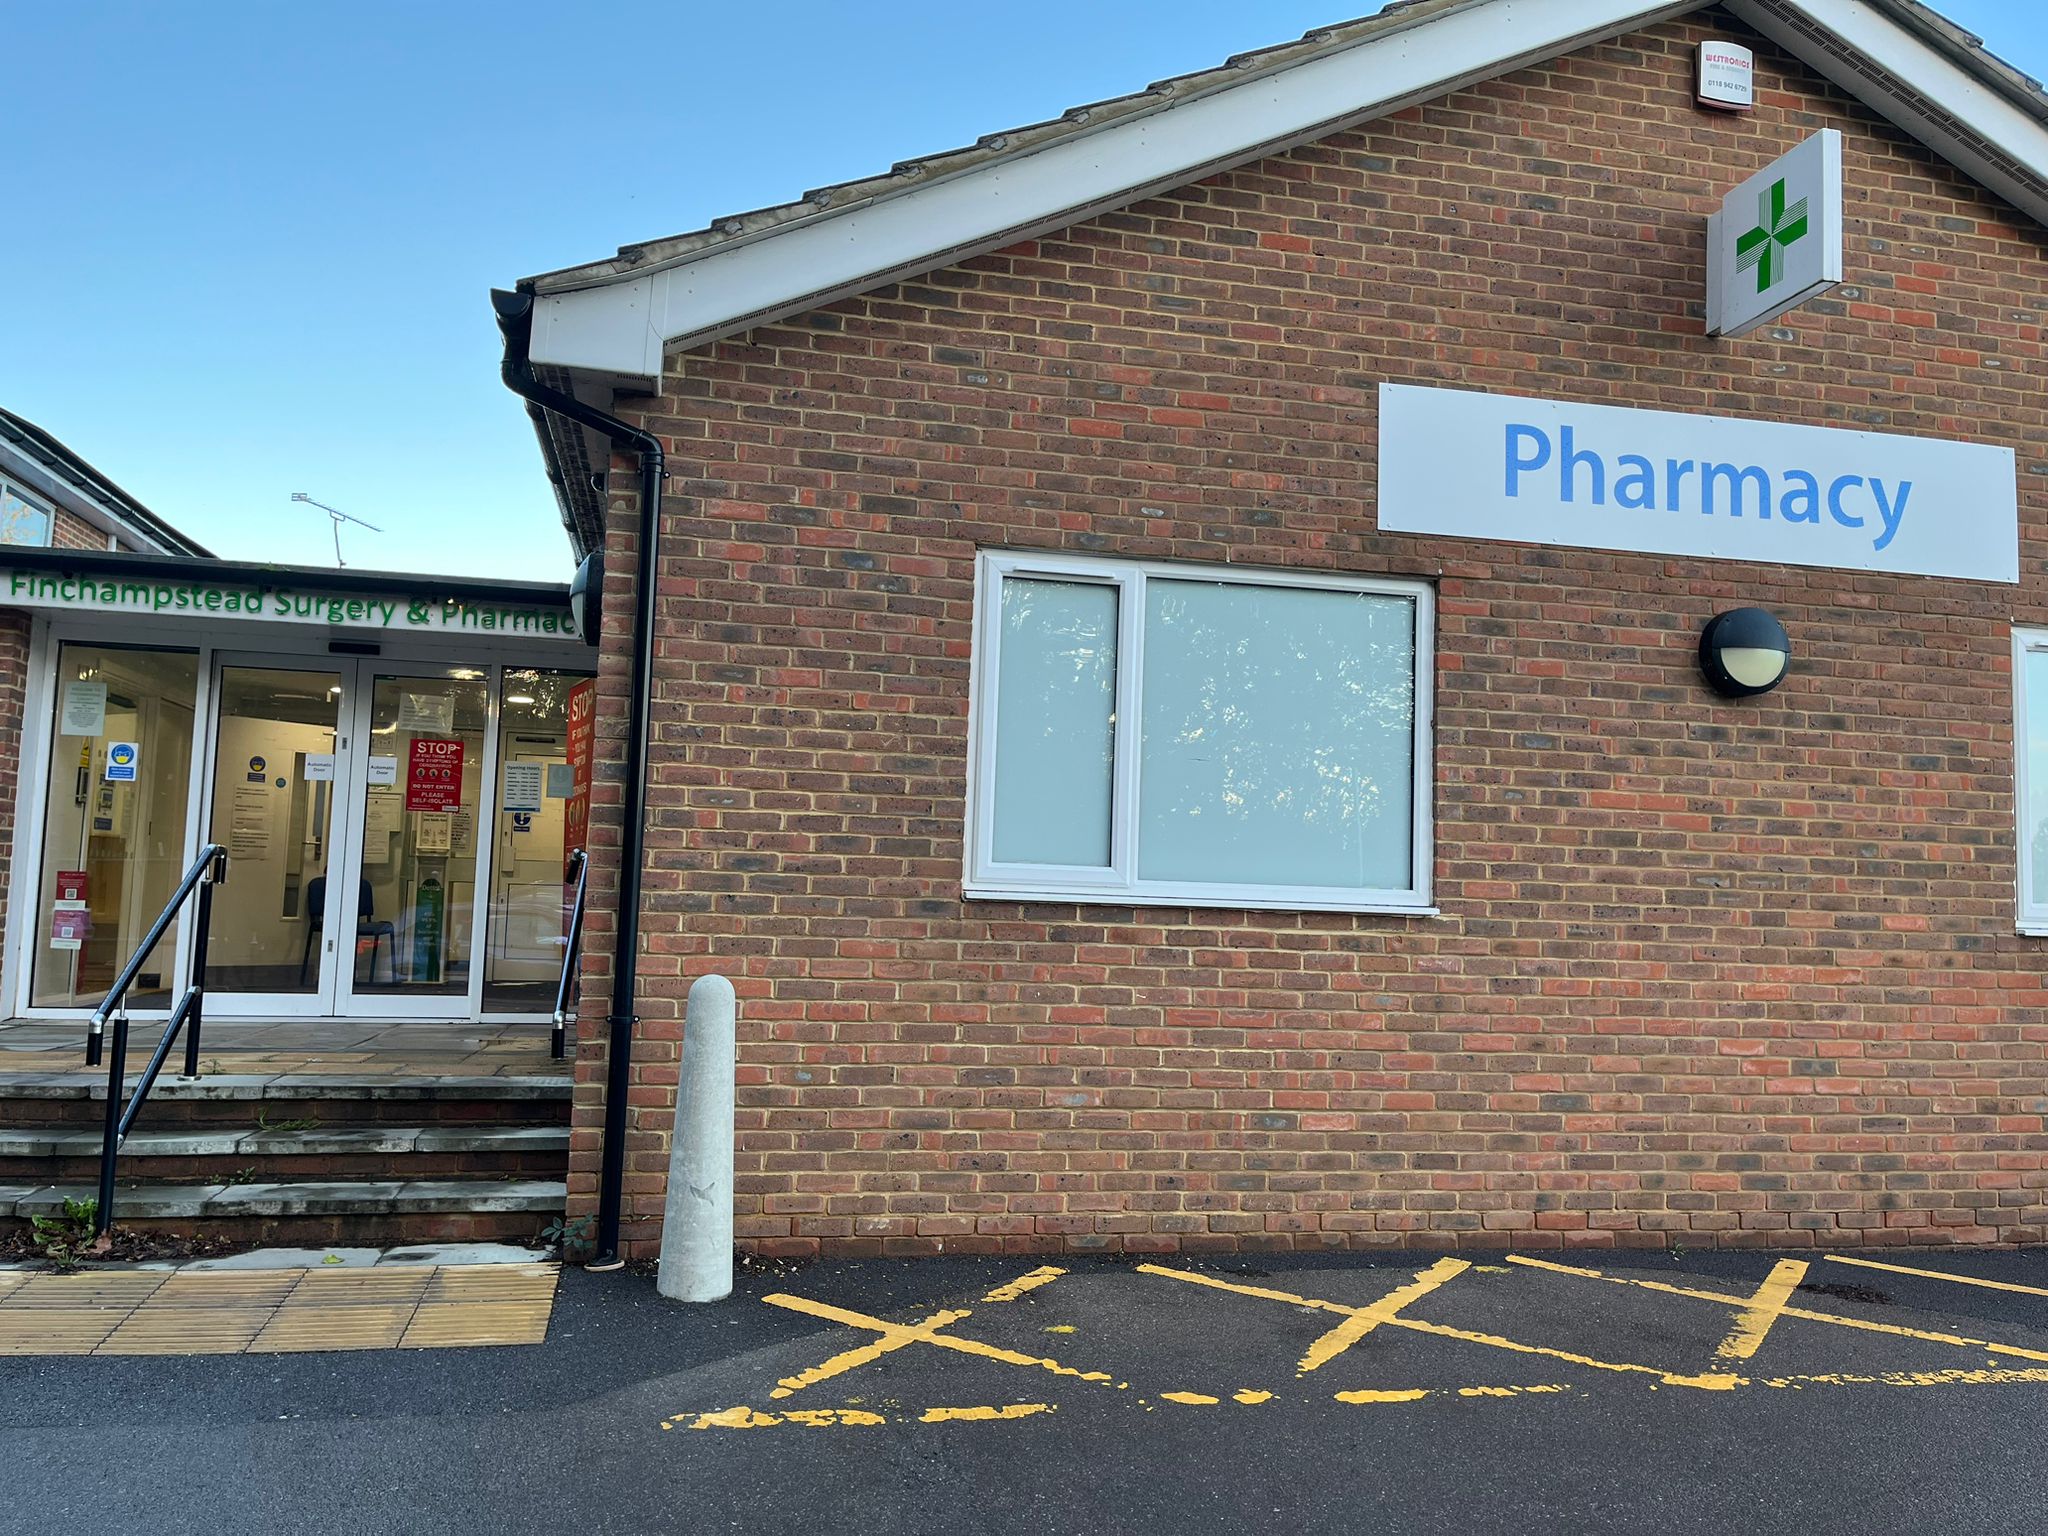 Images Day Lewis Pharmacy Finchampstead